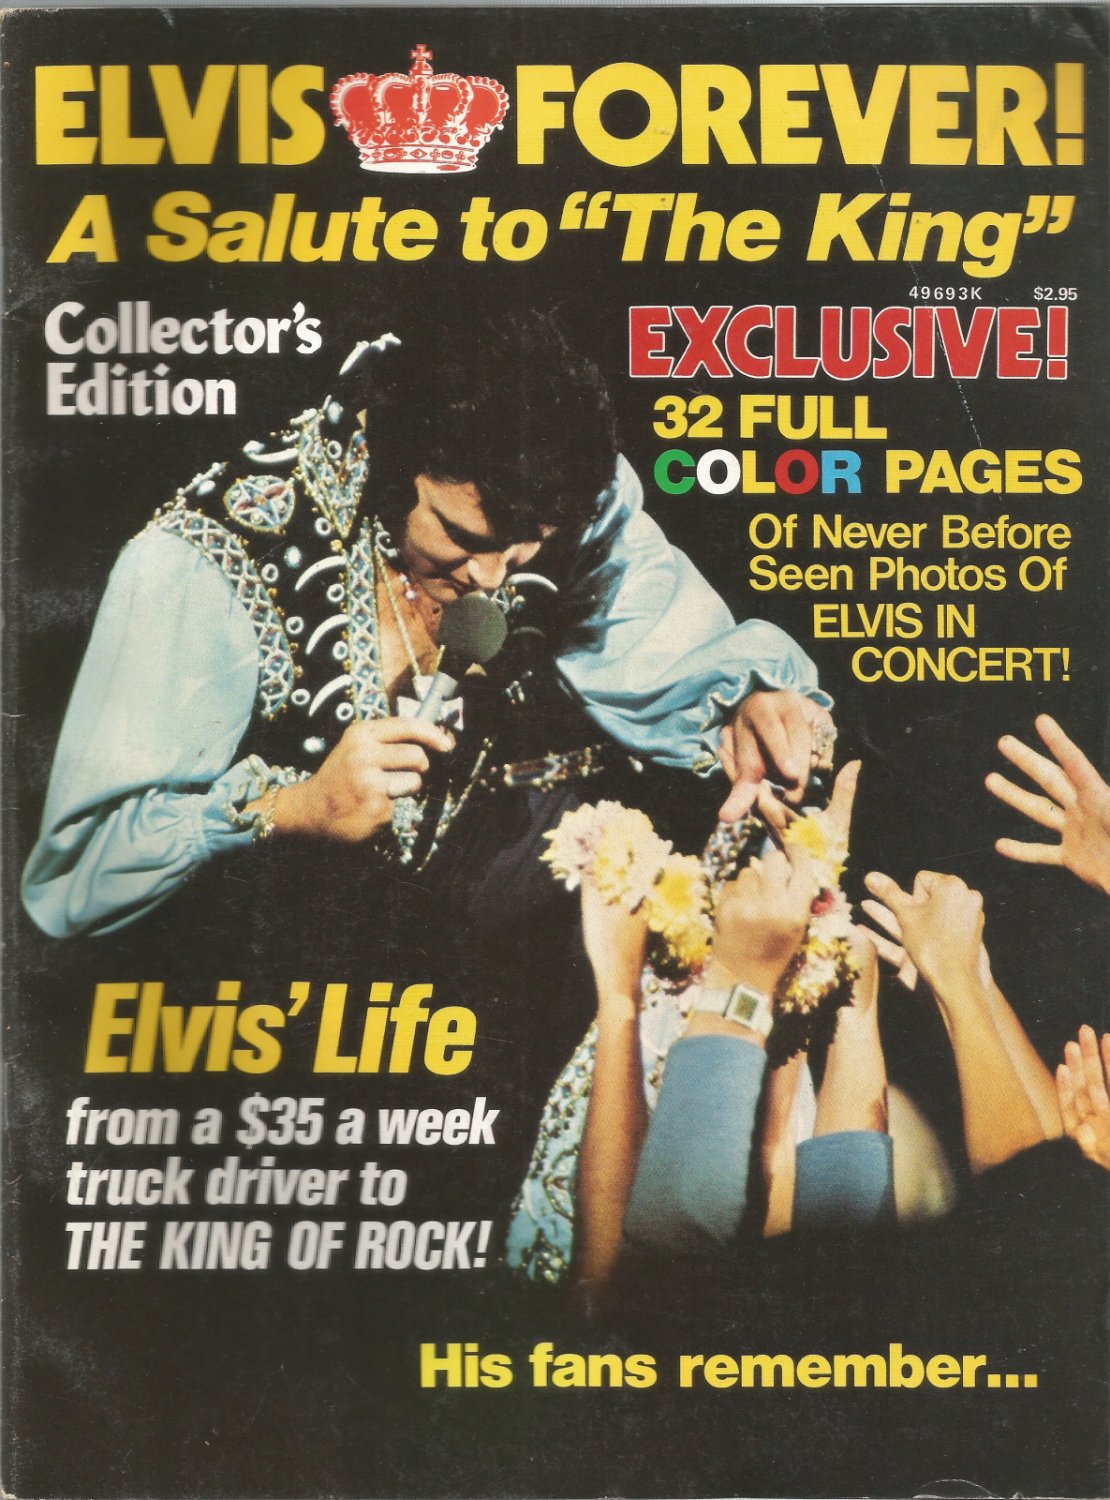 Elvis Forever! A Salute to "The King" Collector's Edition